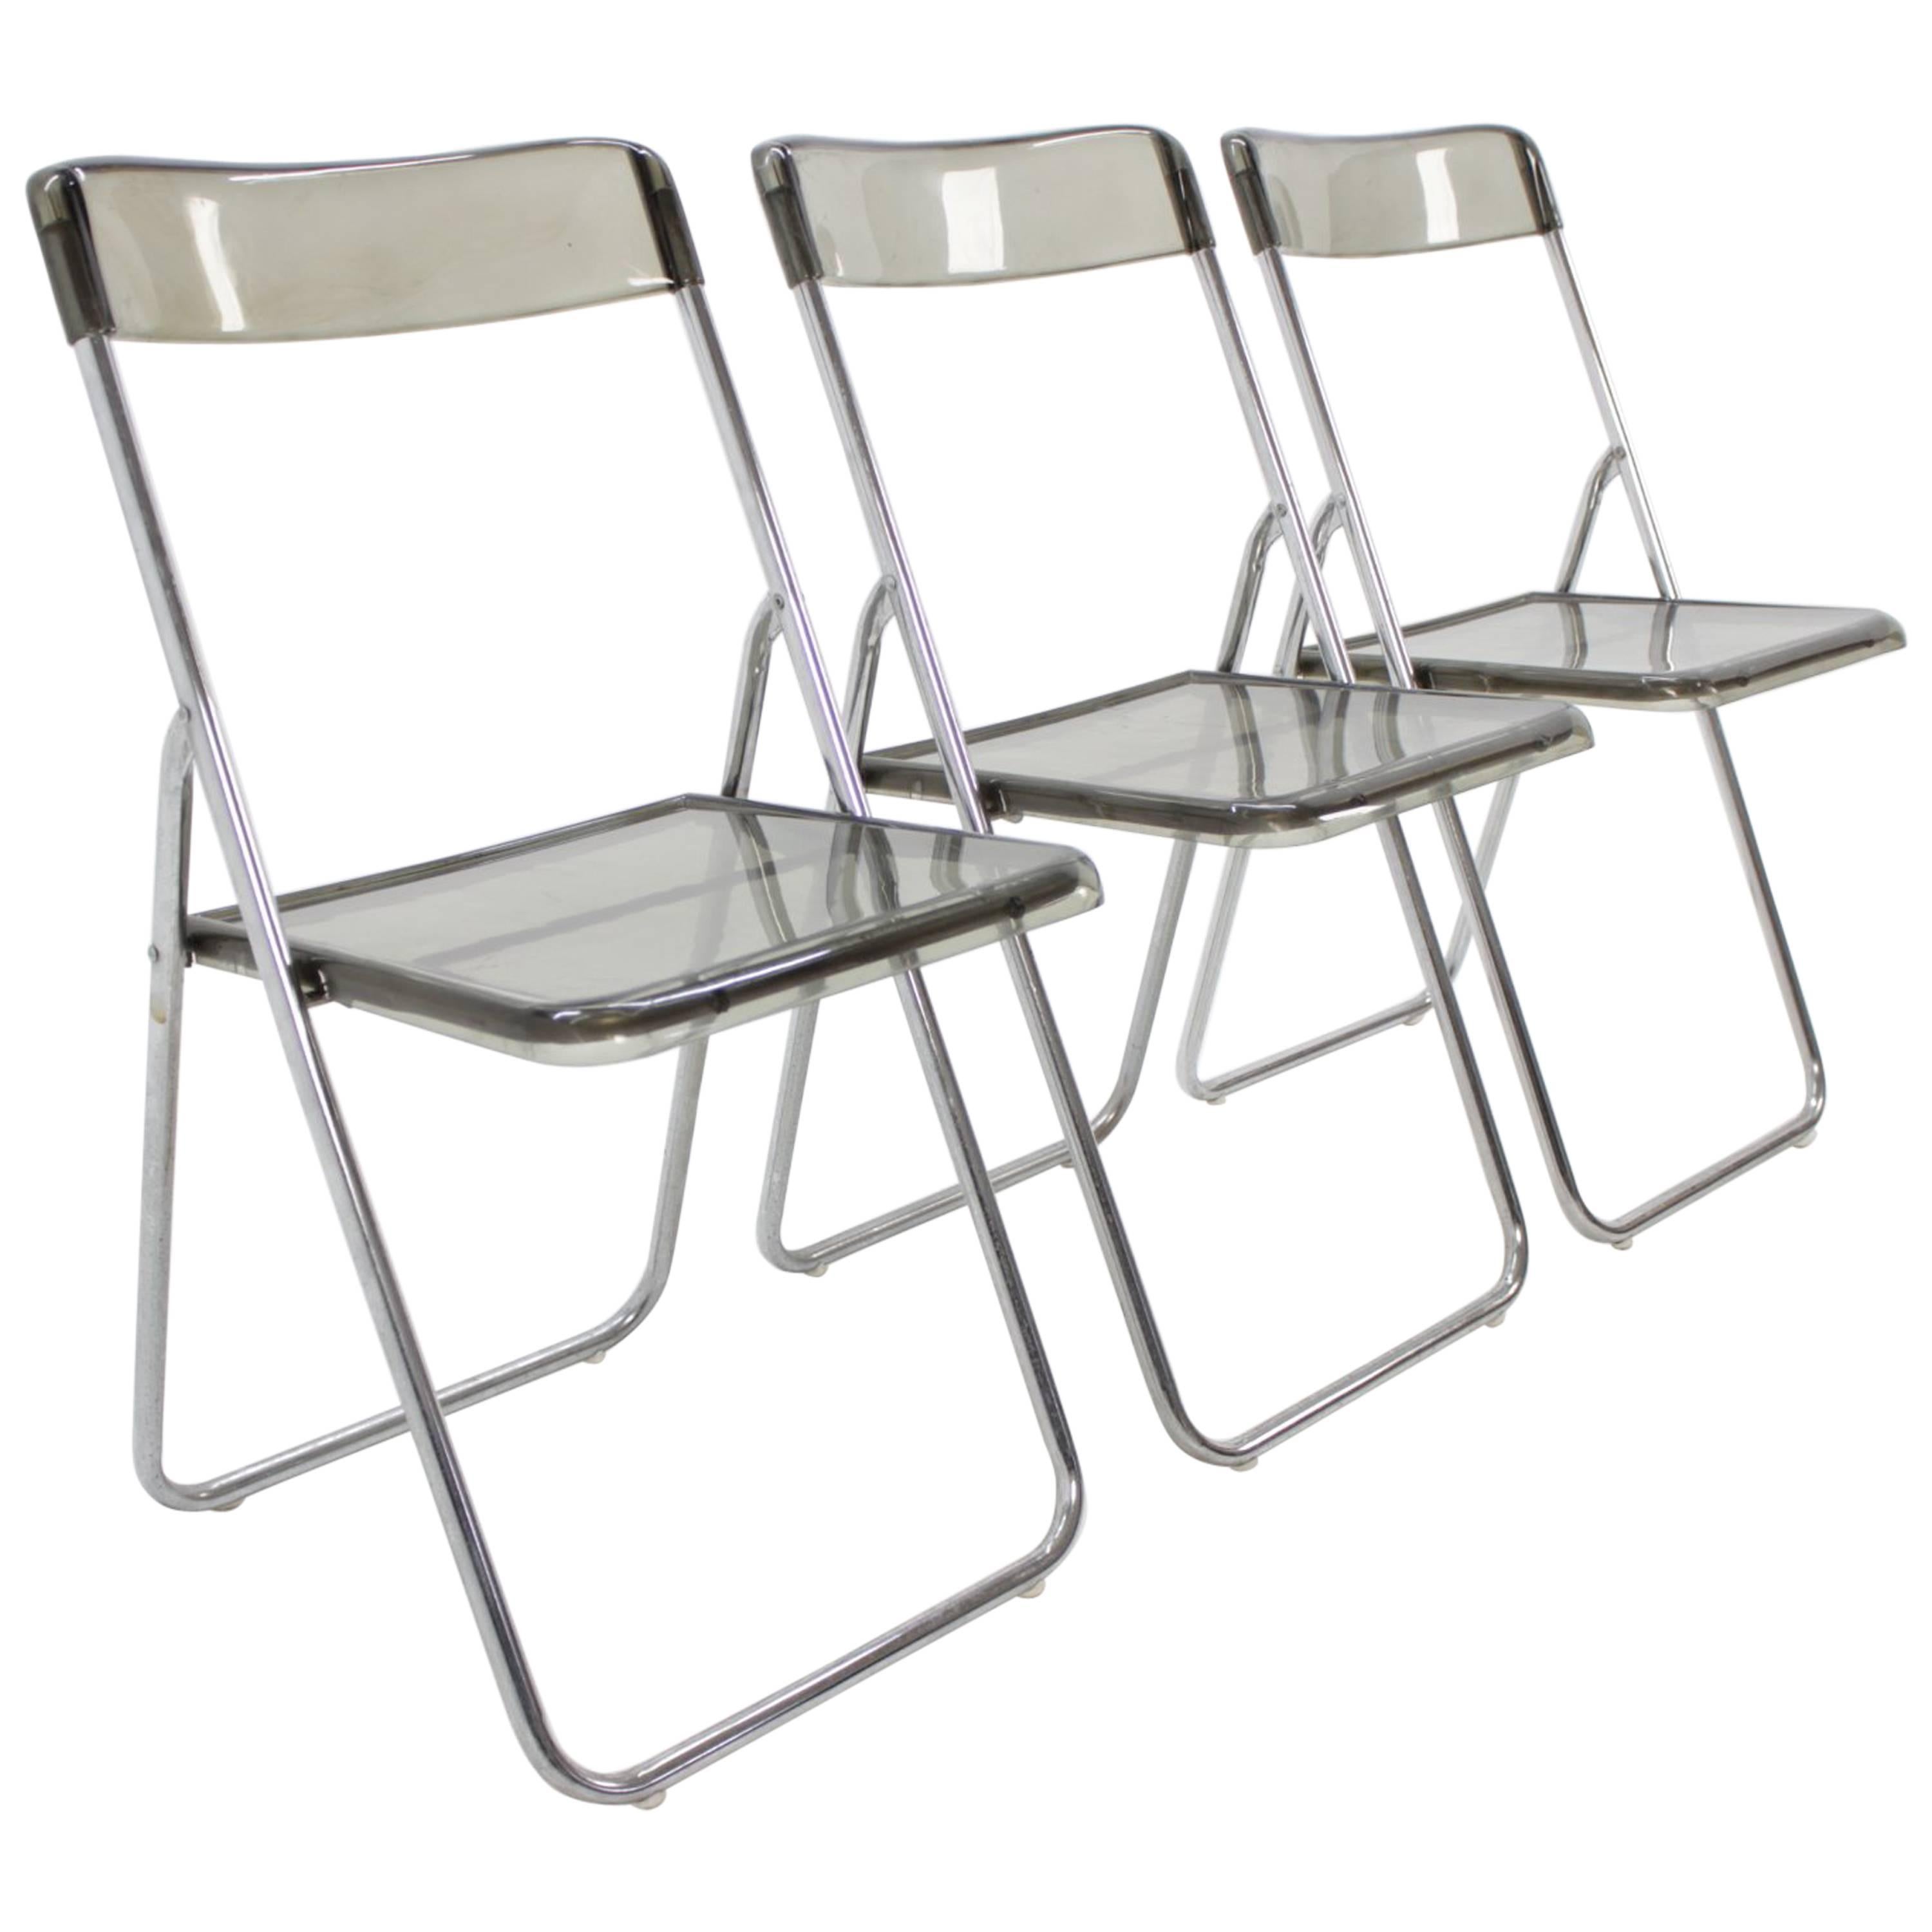 Set of Three Folding Midcentury Chairs from Sweden, 1970s